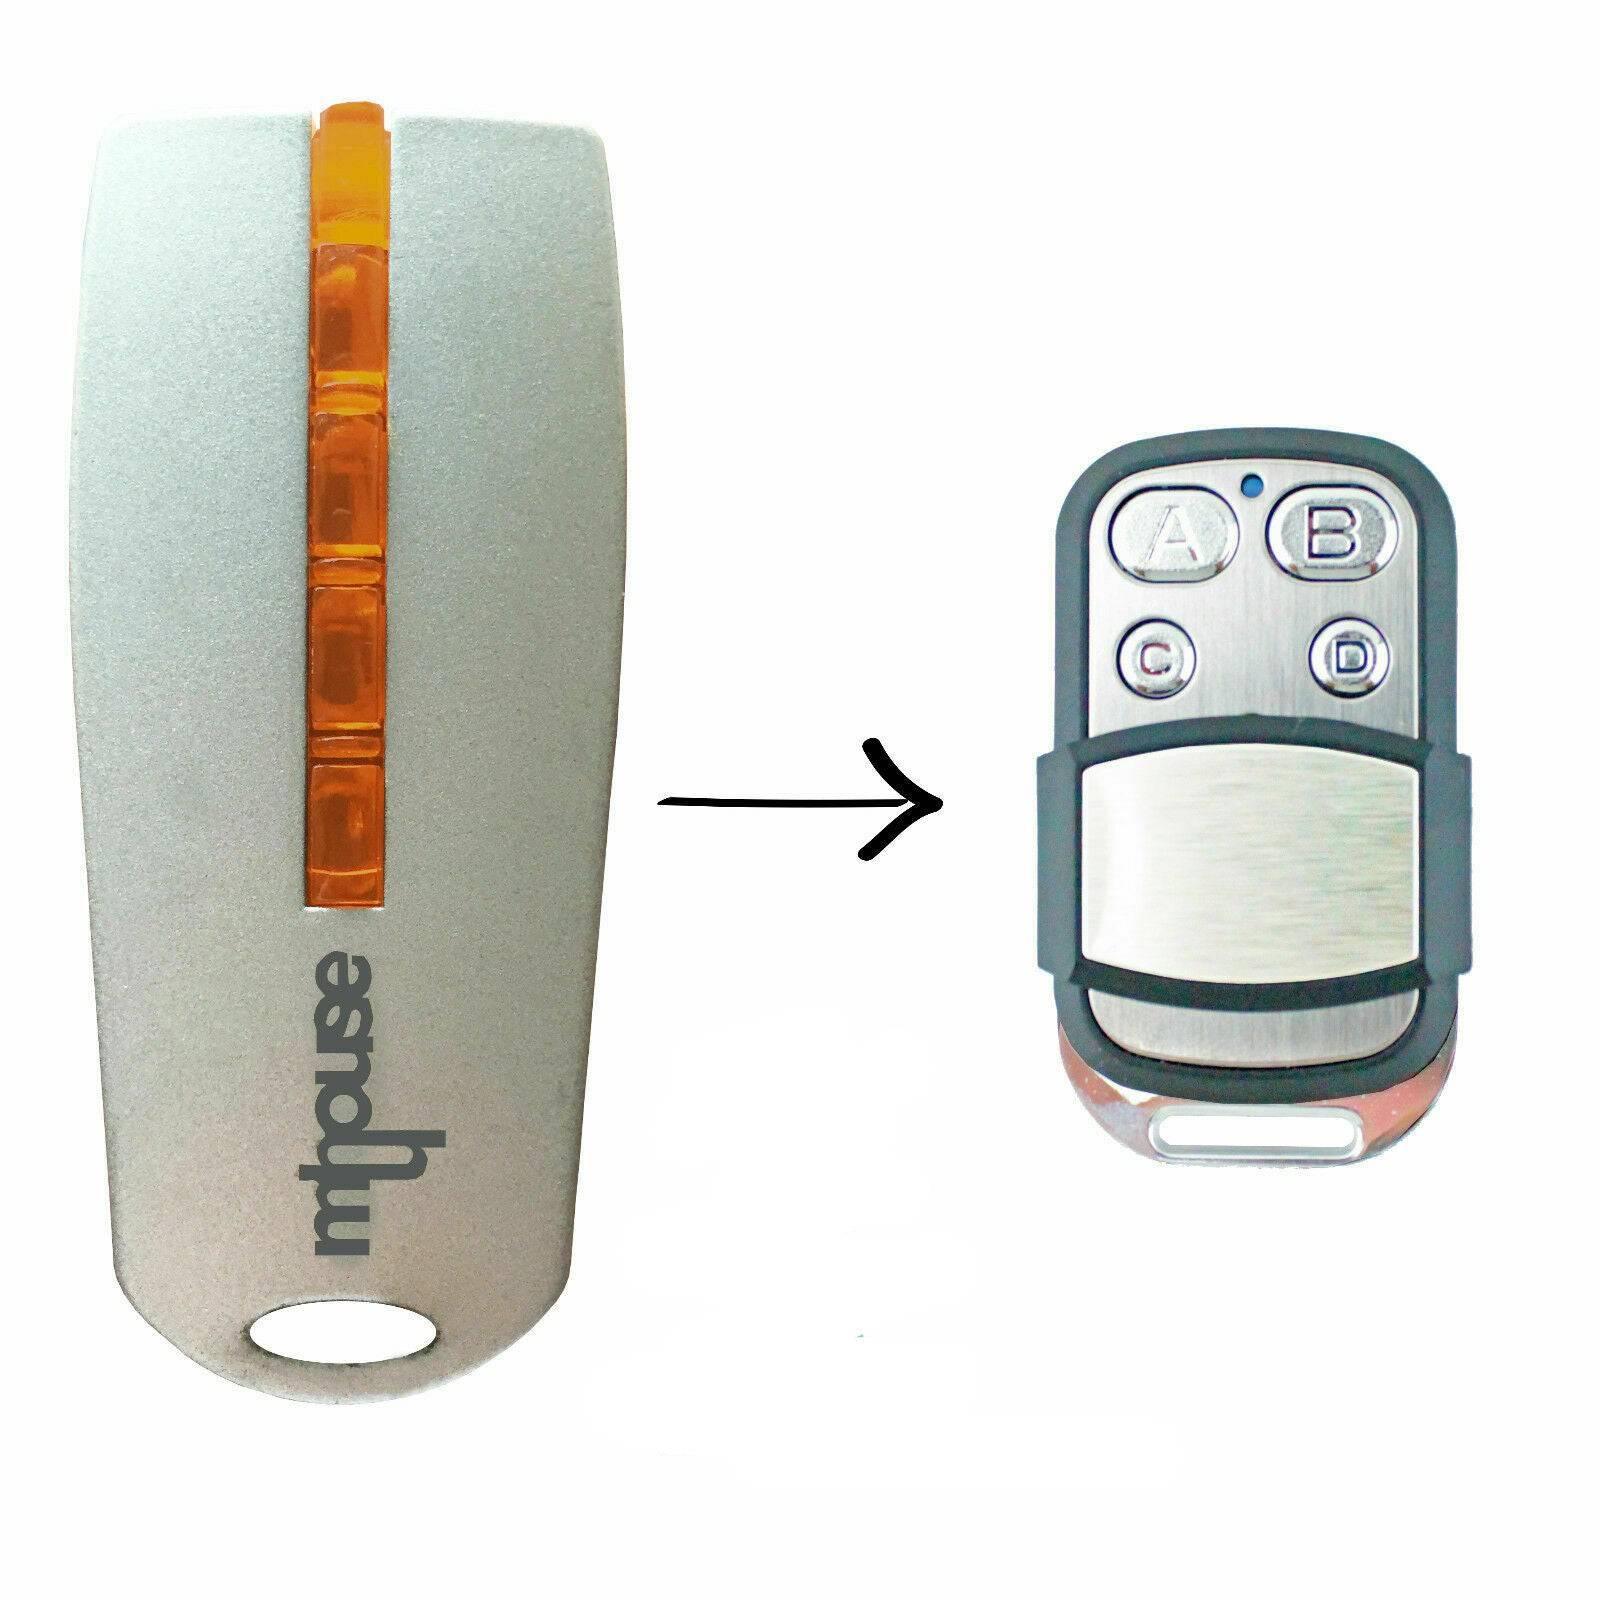 Mhouse/MyHouse Door Gate Remote Control Compatible TX4 TX3 GTX4 433.92mhz - The Remote Factory